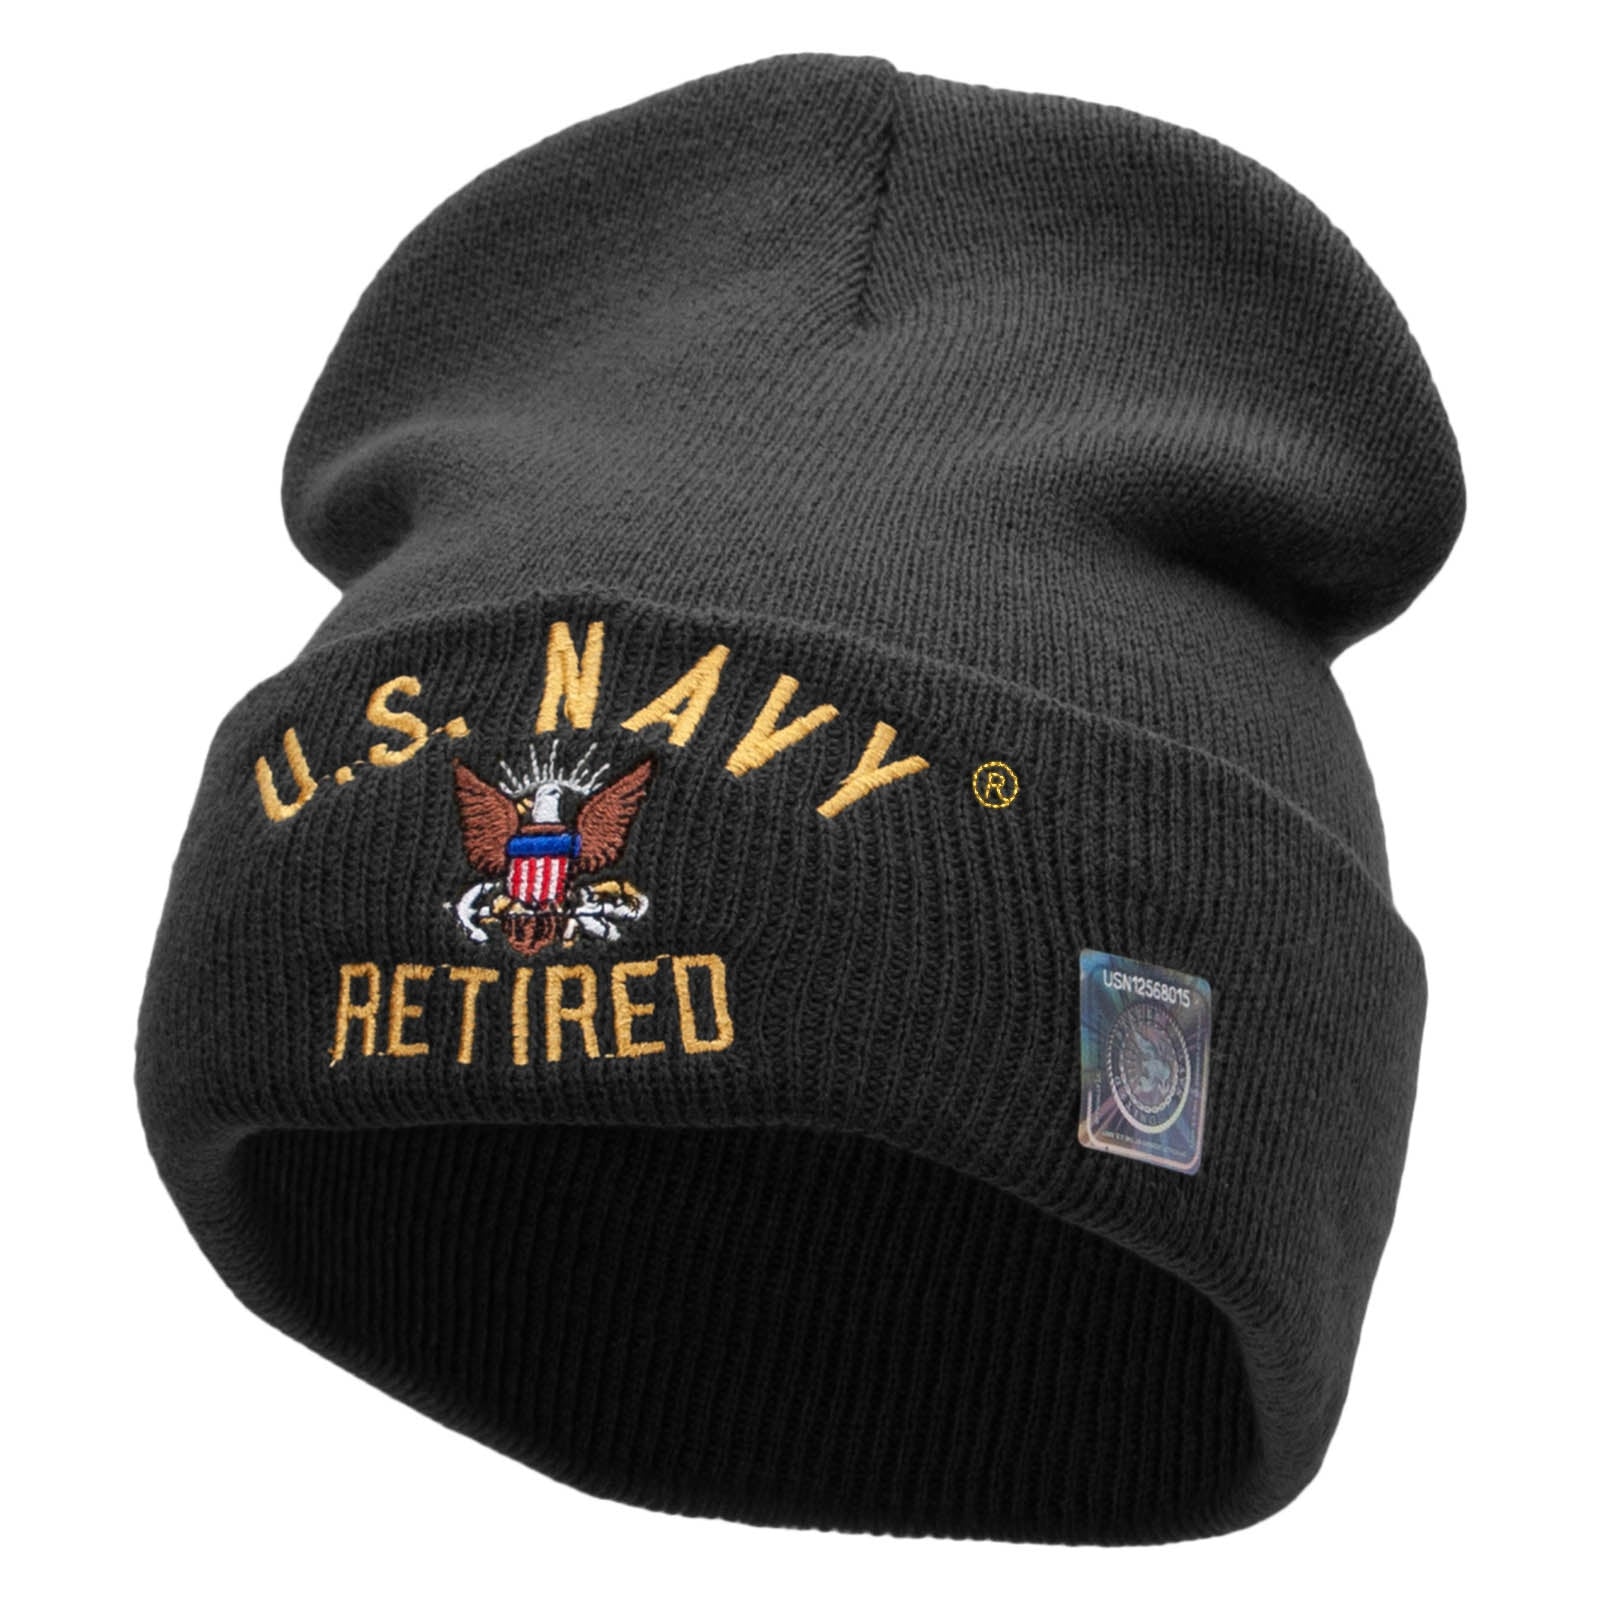 Retired Navy | Beanie Designed Veterans/Retired Made Licensed | Long – USA e4Hats Military in Embroidered US